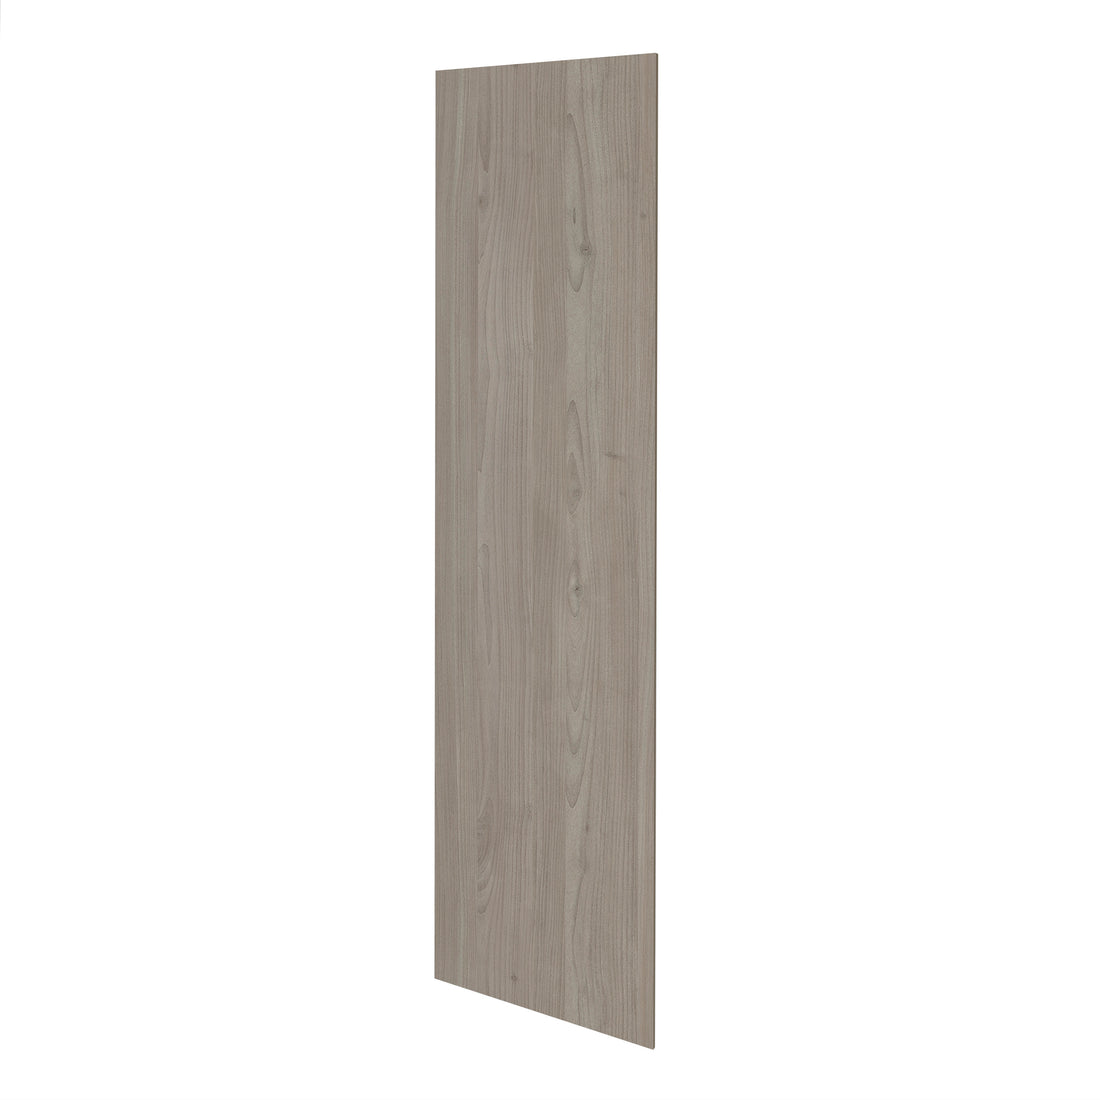 Grey Nordic Slab Style Pantry Kitchen Cabinet End Panel (24 in W x 0.75 in D x 96 in H) -  Pro-Edge HD